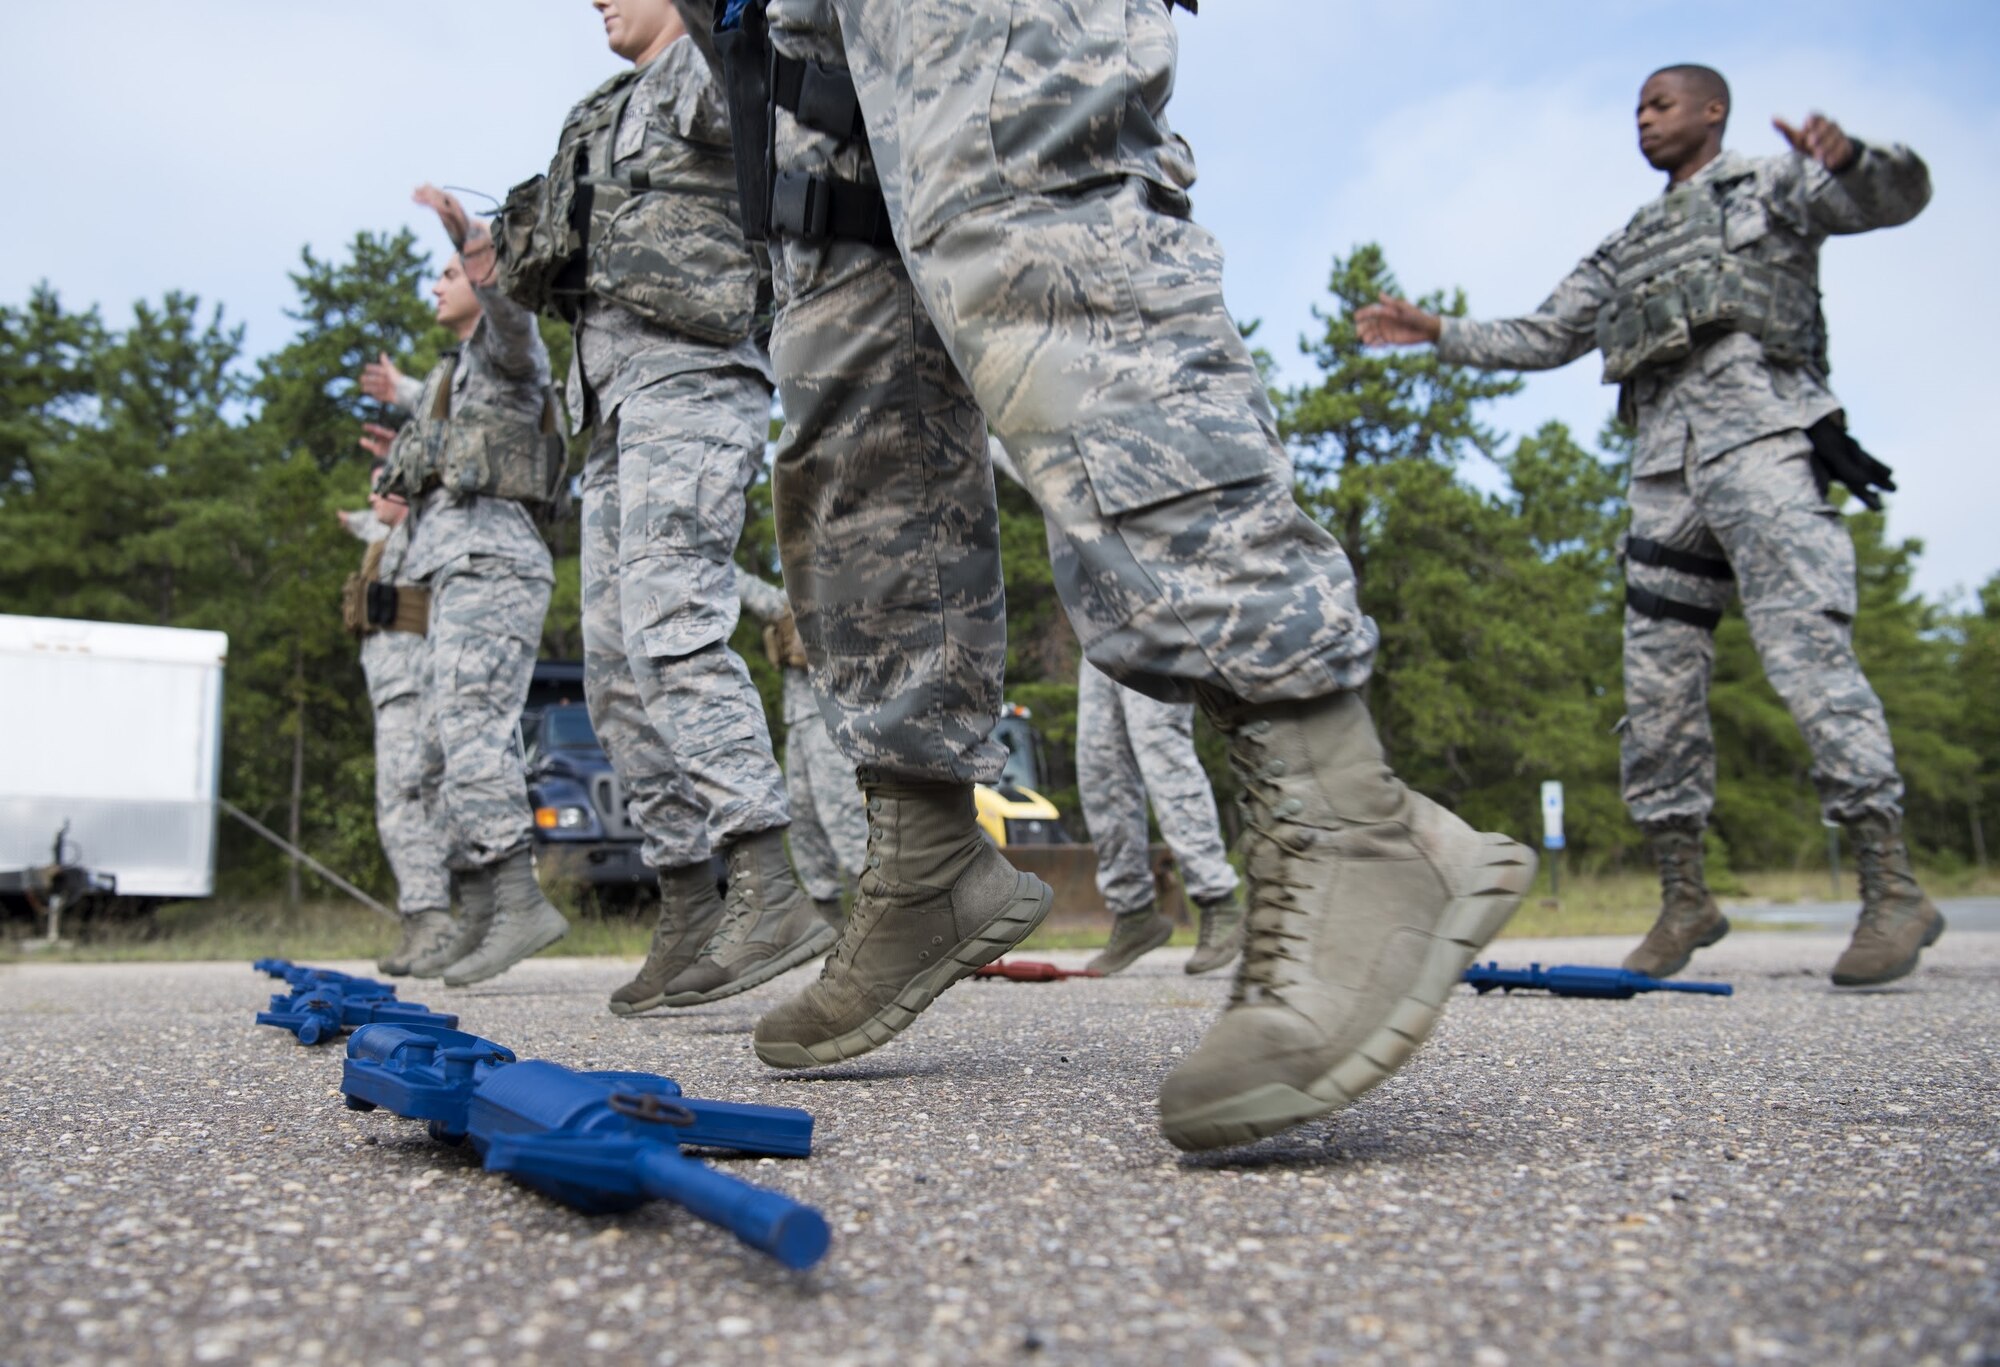 Security forces Airmen with Air Mobility Command exercise while training on Joint Base McGuire-Dix-Lakehurst, New Jersey, Sept. 5, 2018. The team spent three weeks preparing for the 2018 Air Force Defender Challenge that tested security forces Airmen’s skills through weapons scenarios, dismounted operations and combat endurance. (U.S. Air Force photo by Airman Ariel Owings)